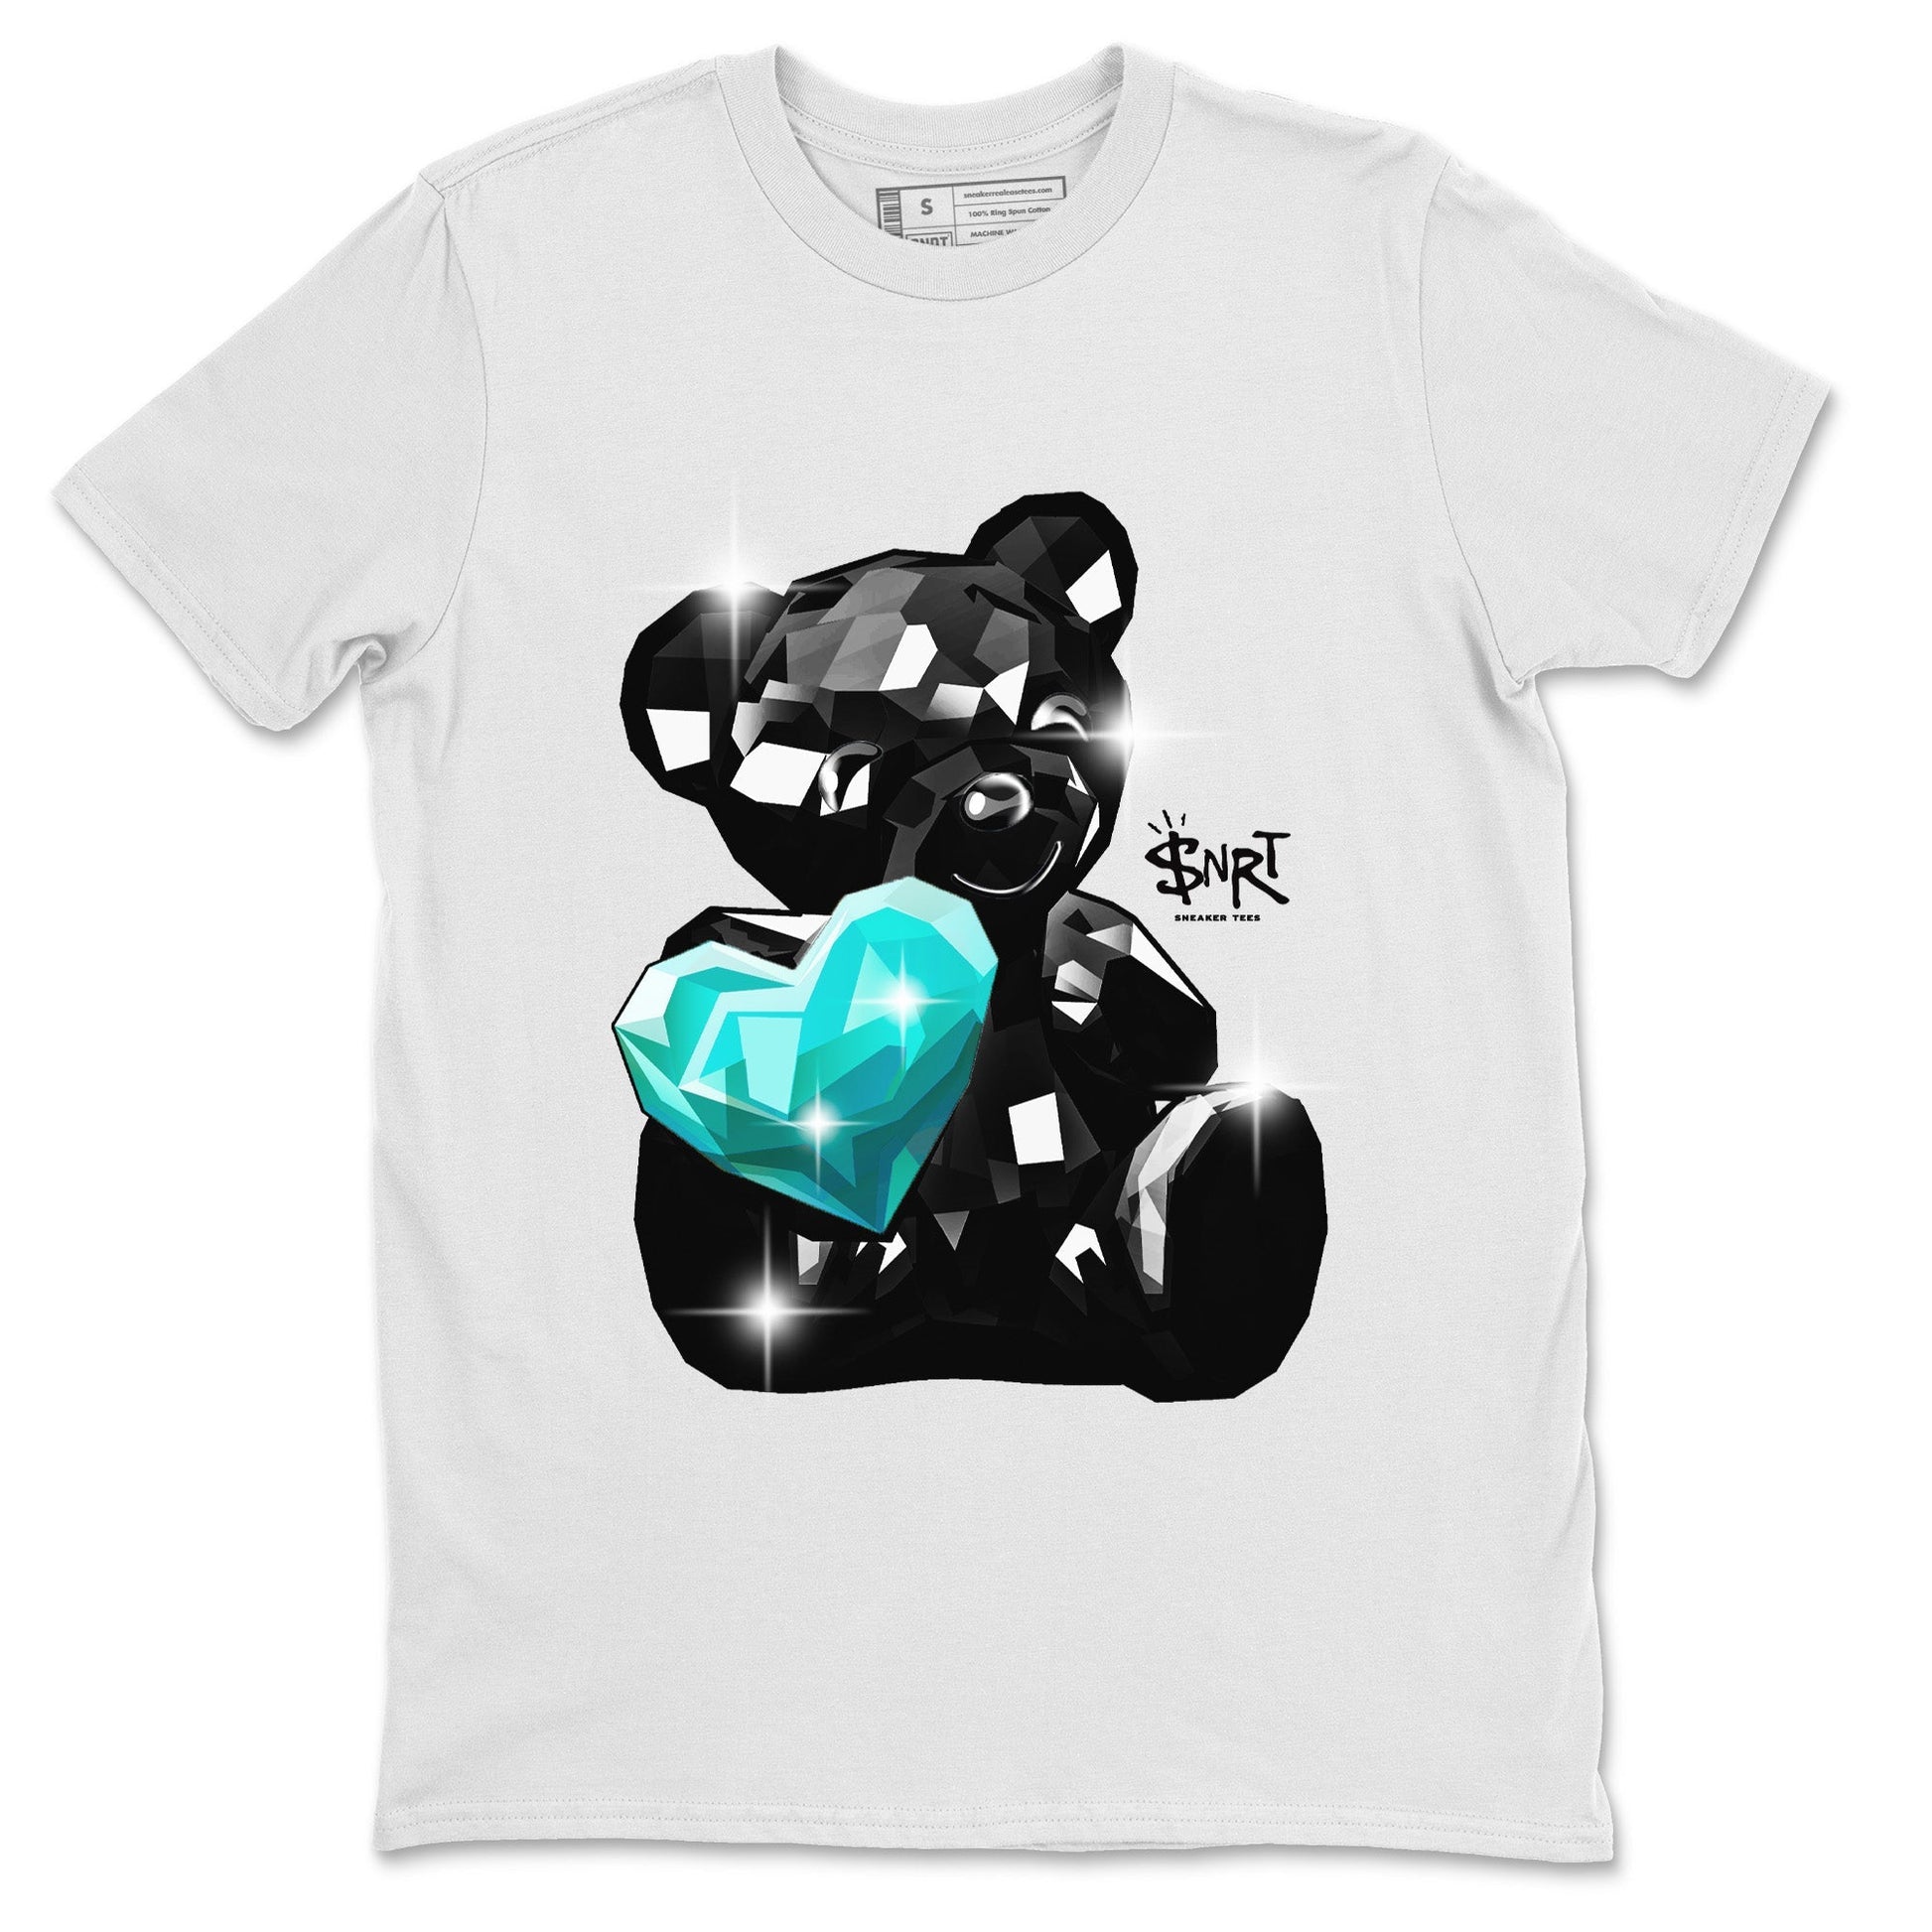 Air Force 1 Tiffany Bear Germs Crew Neck Sneaker Tees Air Force 1 Low x Tiffany Sneaker T-Shirts Washing and Care Tip